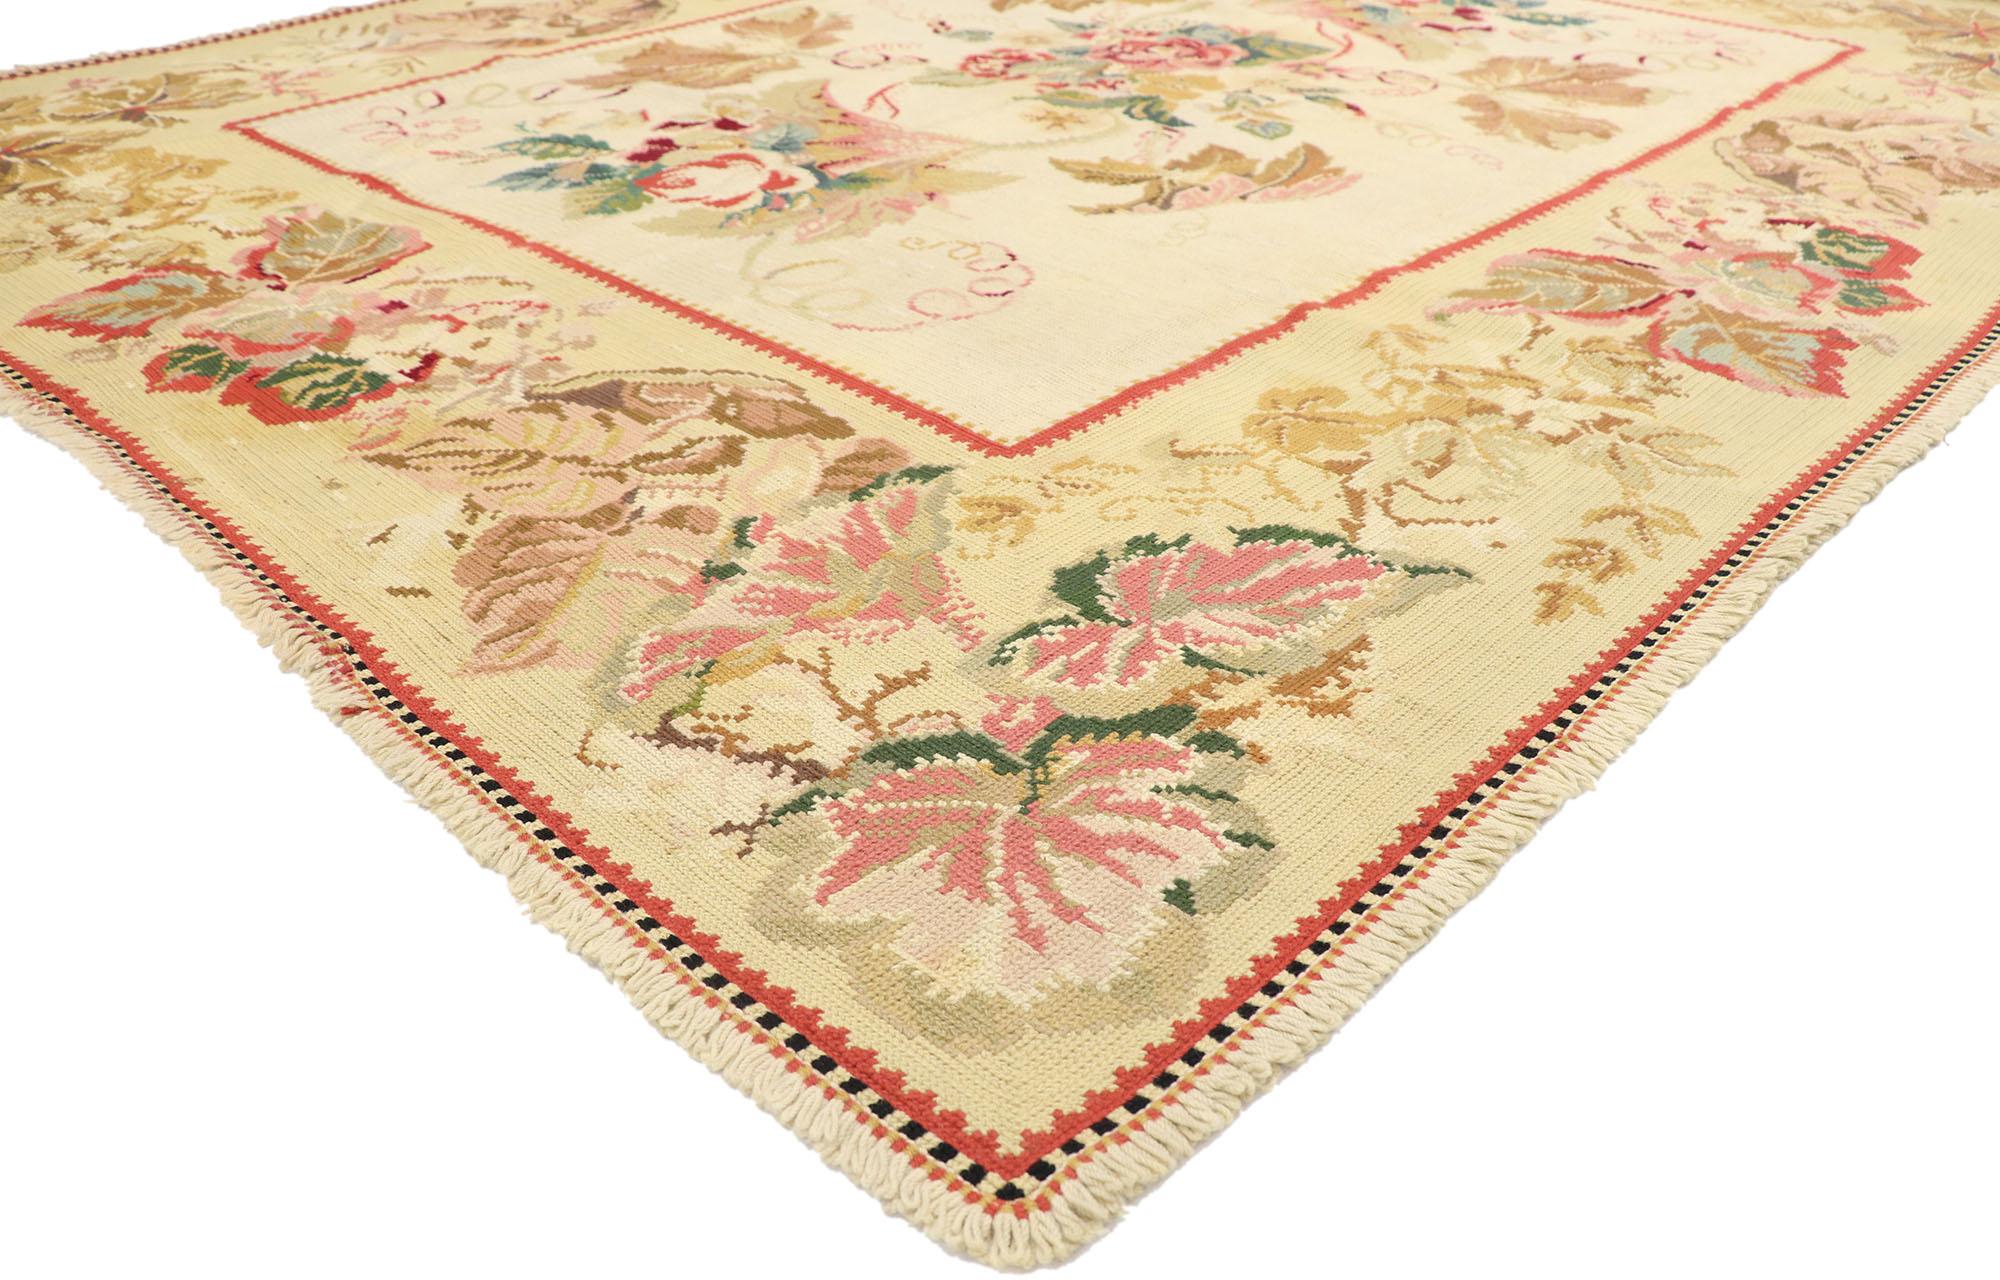 77921 Antique Portuguese Arraiolos needlepoint rug with Romantic French country style 07'10 x 09'10. Ornate details and effortless beauty with romantic connotations, this hand-woven wool antique Portuguese Arraiolos rug is poised to impress. This